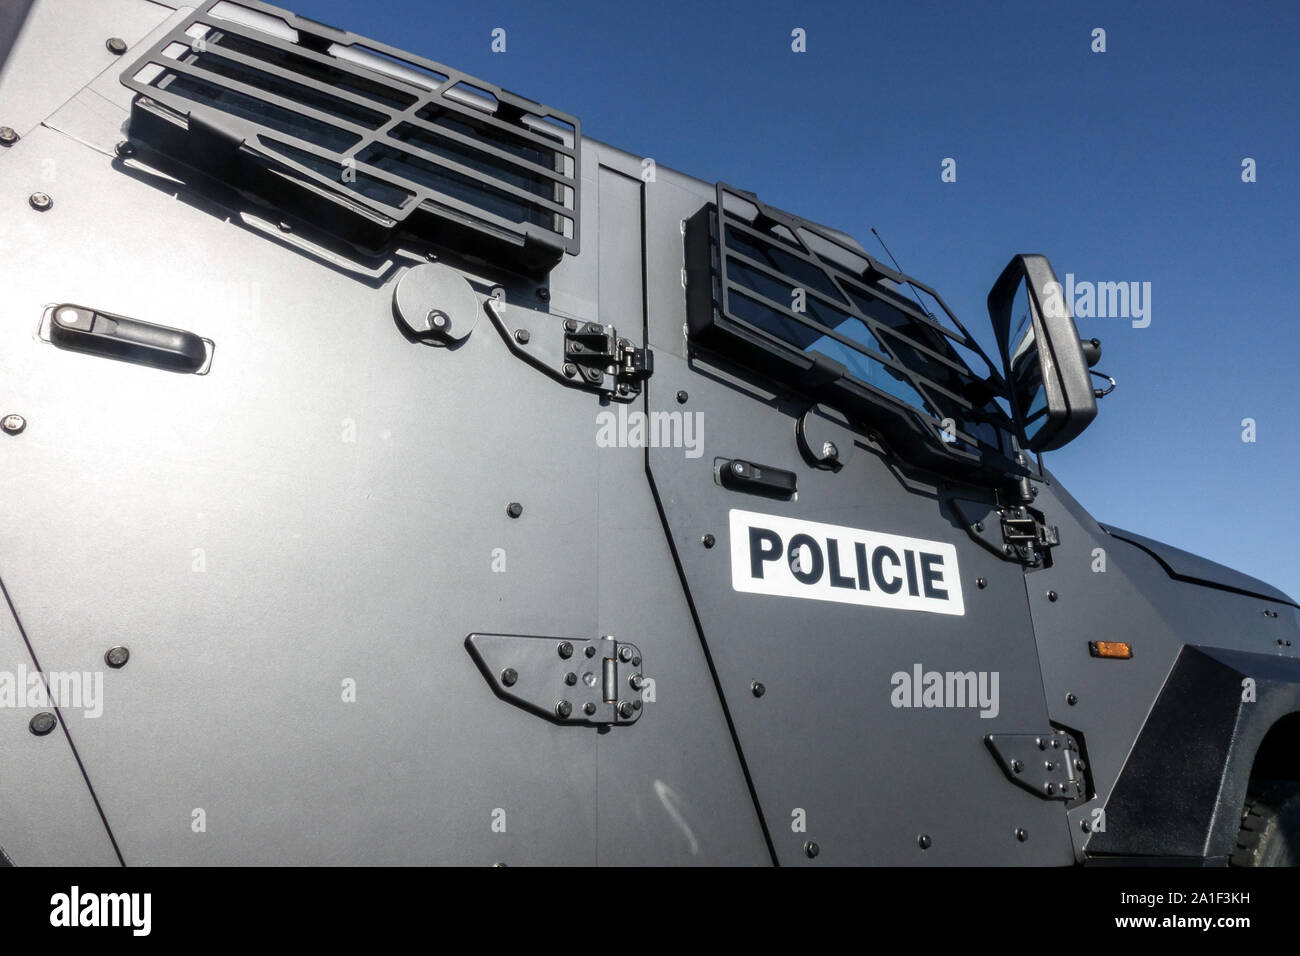 Tatra T-Kat armored vehicle for Czech Police Stock Photo